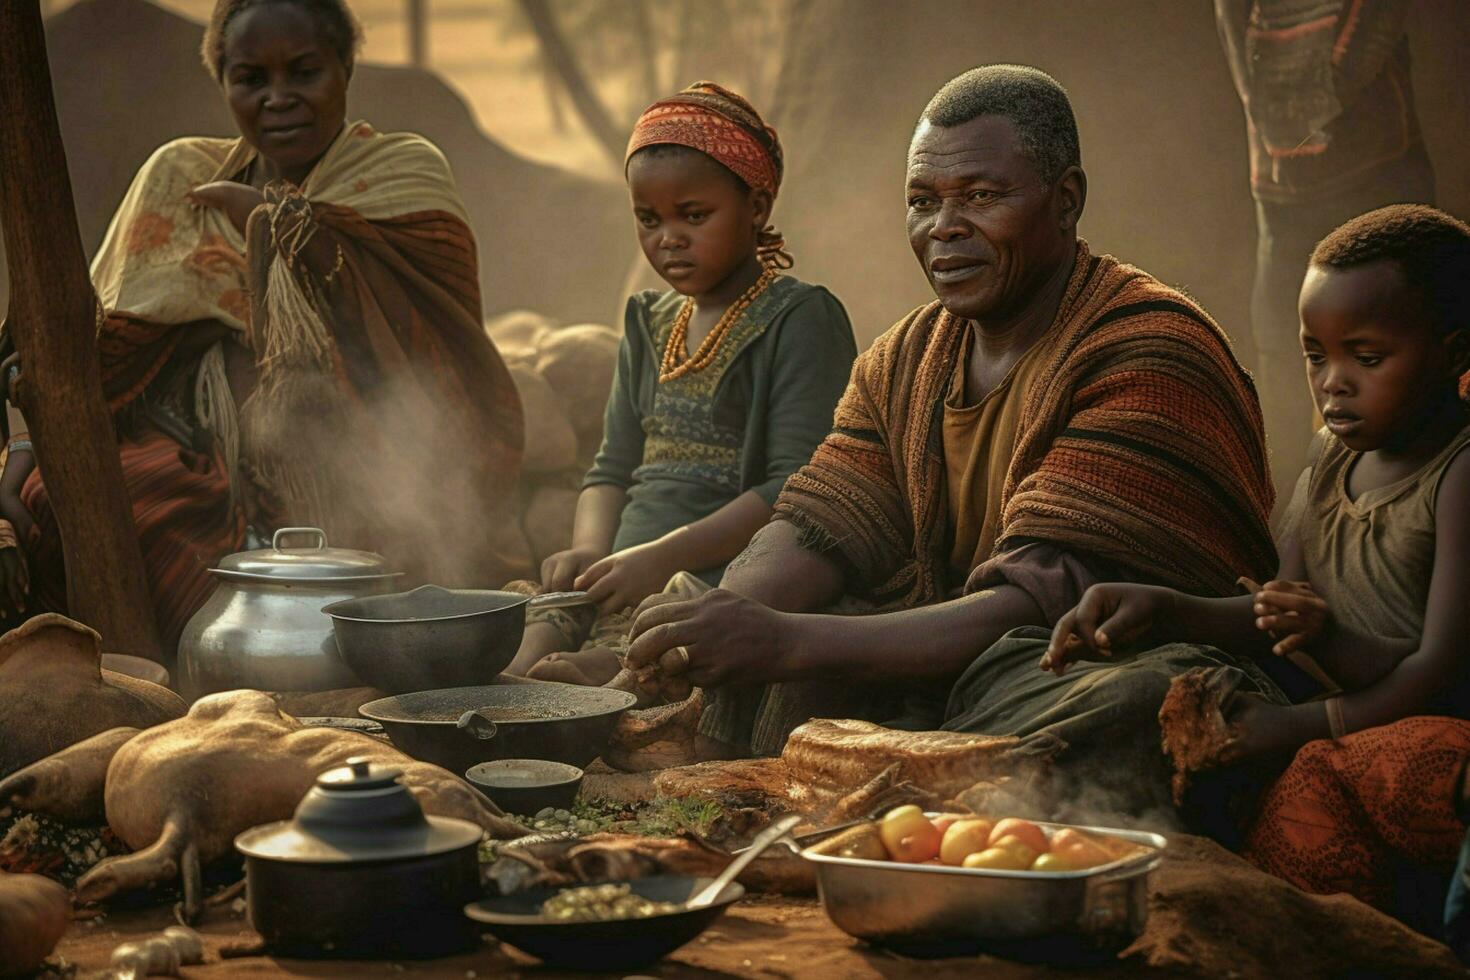 The warmth and hospitality of African people photo